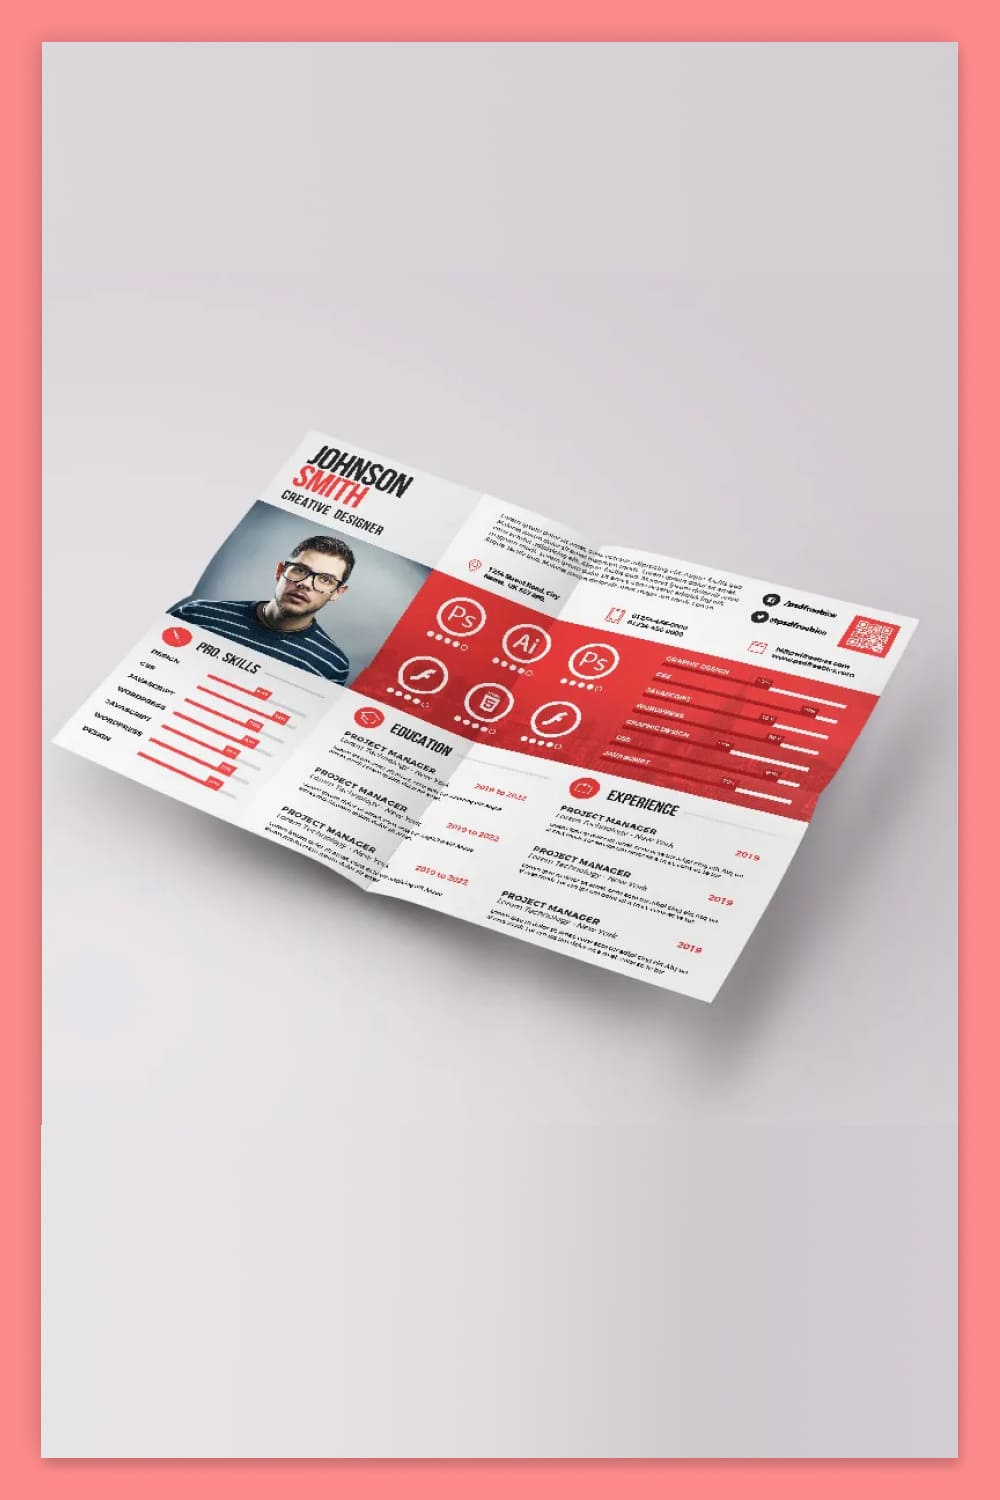 Photo resume in the form of a flyer with infographics and photos.